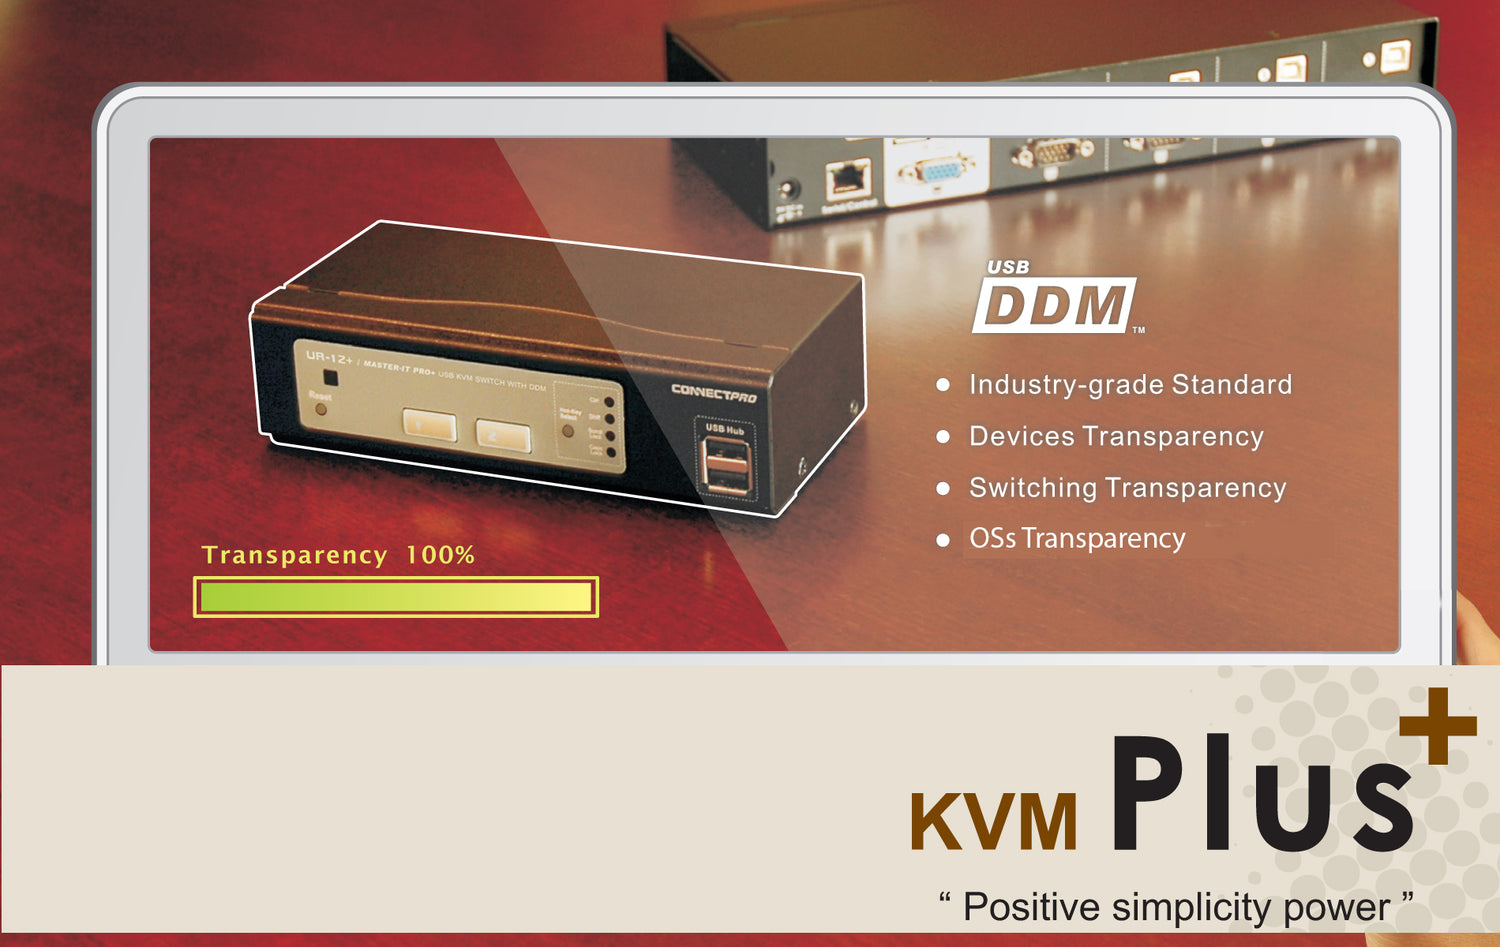 DDM class KVM switch at its best,  Dynamic Device Mapping Patents